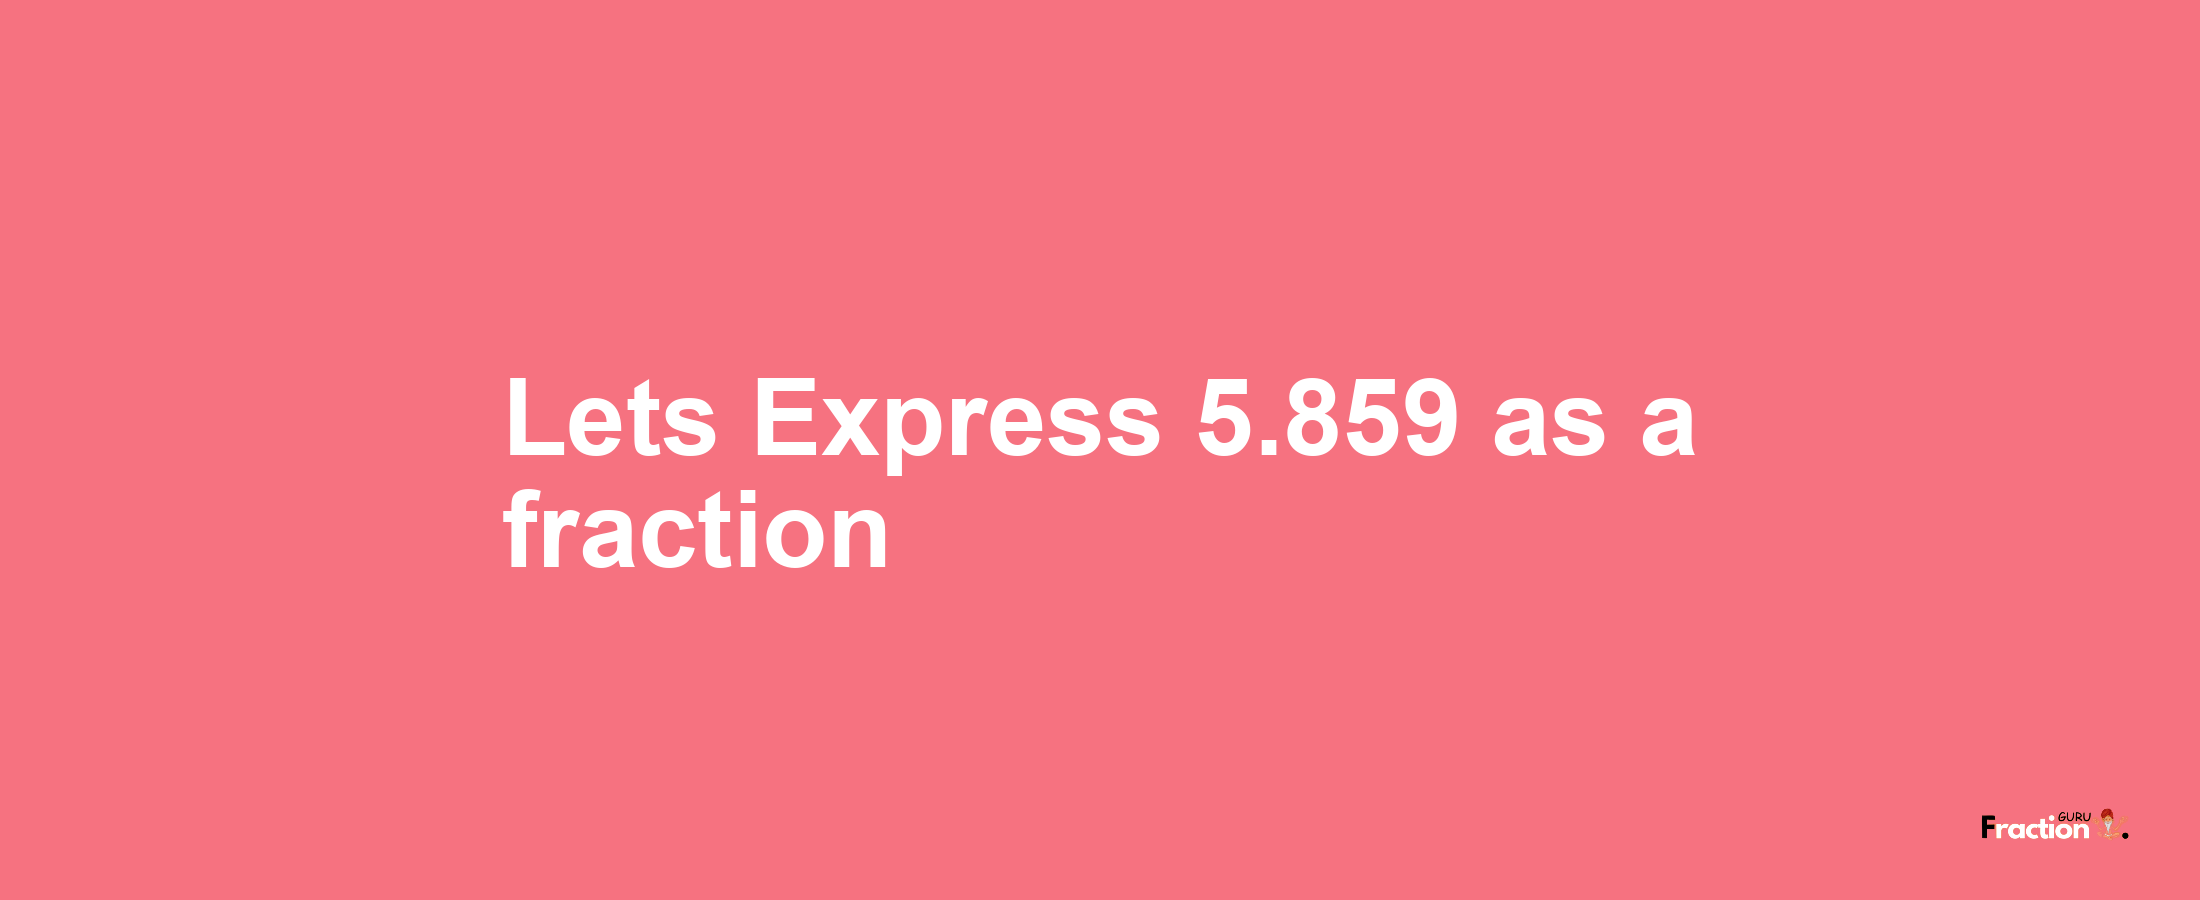 Lets Express 5.859 as afraction